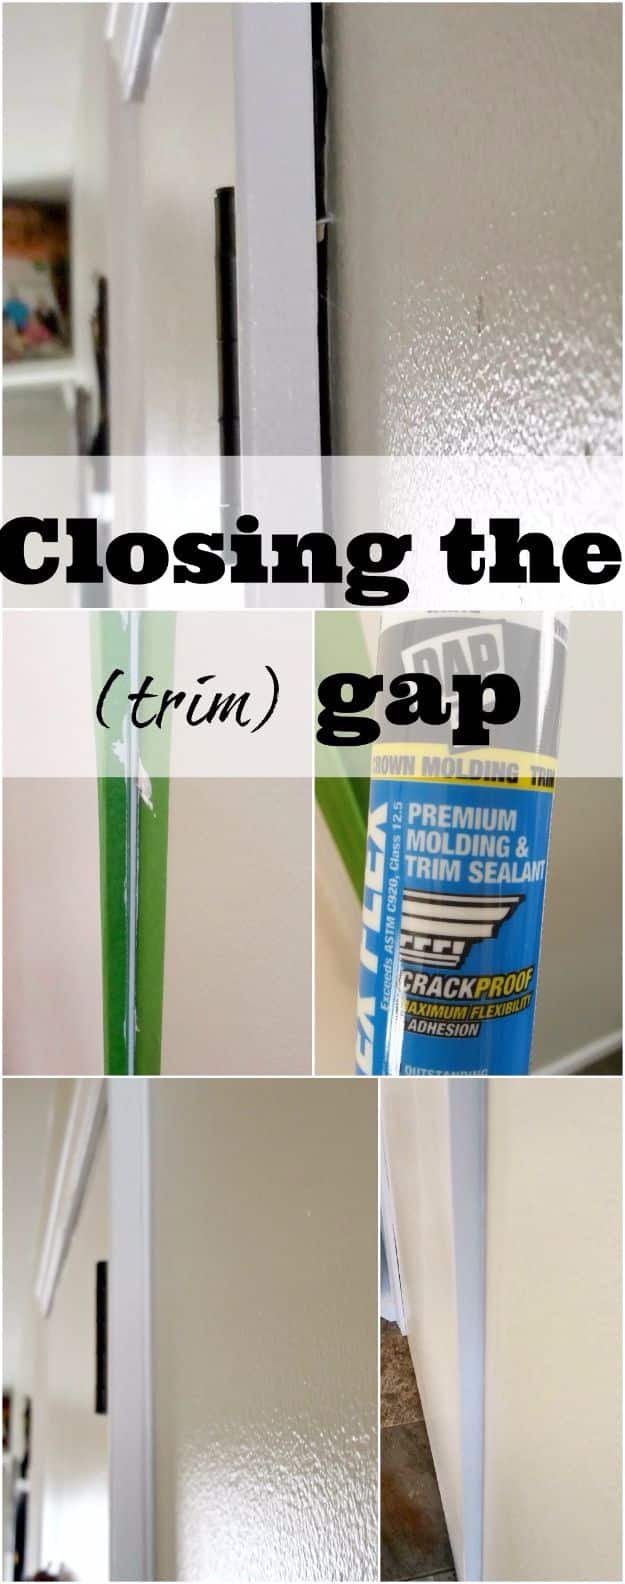 Easy Home Repair Hacks - Fixing The Gap In Trim - Quick Ways to Easily Fix Broken Things Around The House - DIY Tricks for Home Improvement and Repairs - Simple Solutions for Kitchen, Bath, Garage and Yard - Caulk, Grout, Wall Repair and Wood Patching and Staining #hacks #homeimprovement